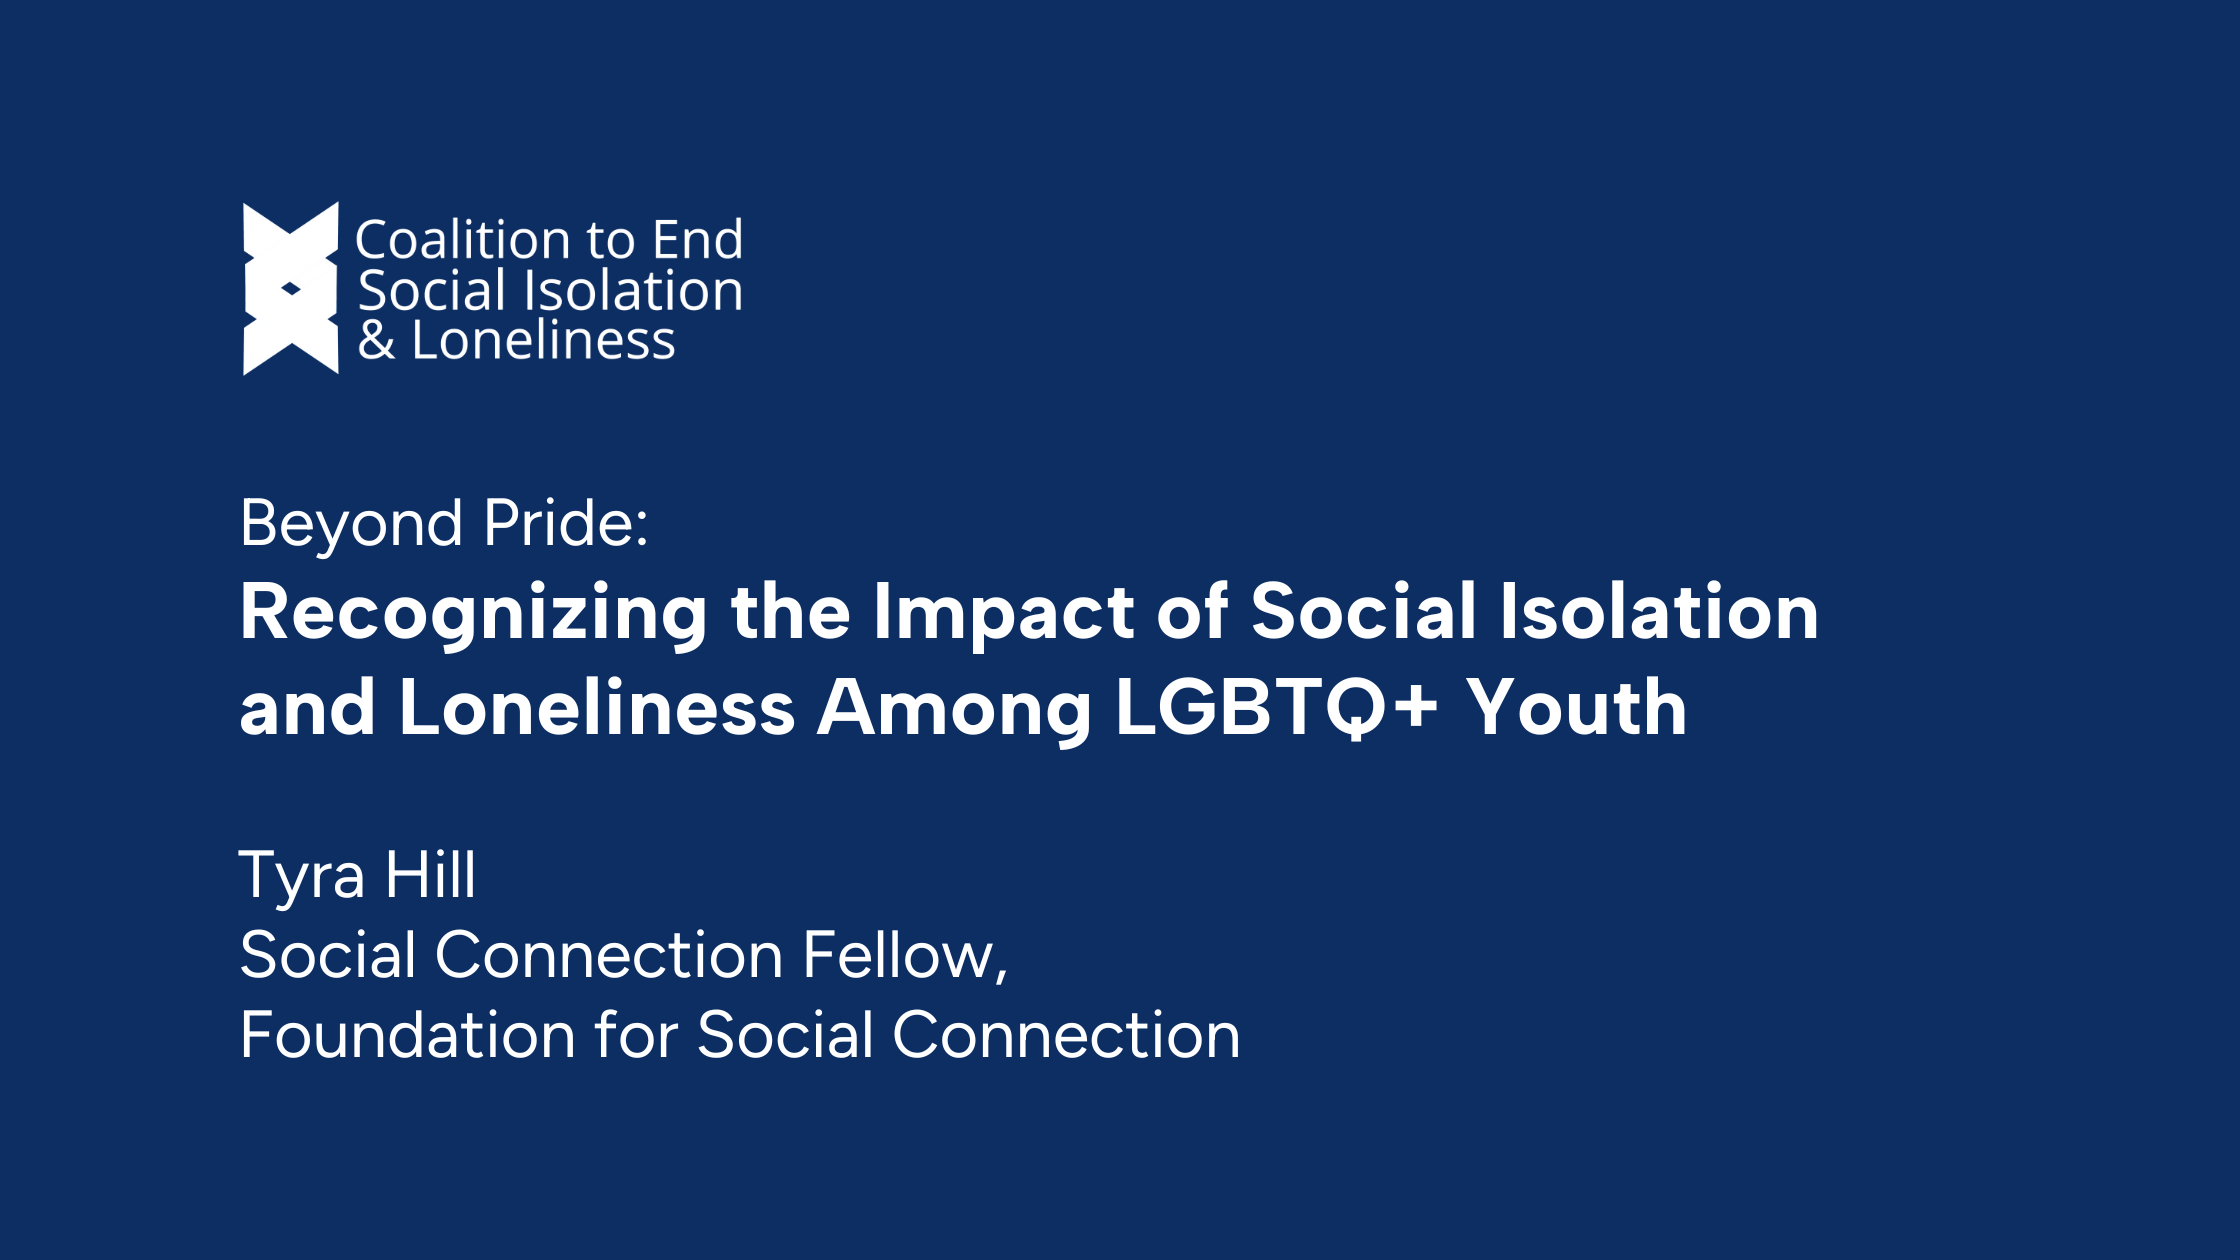 Beyond Pride: Recognizing the Impact of Social Isolation and Loneliness Among LGBTQ+ Youth